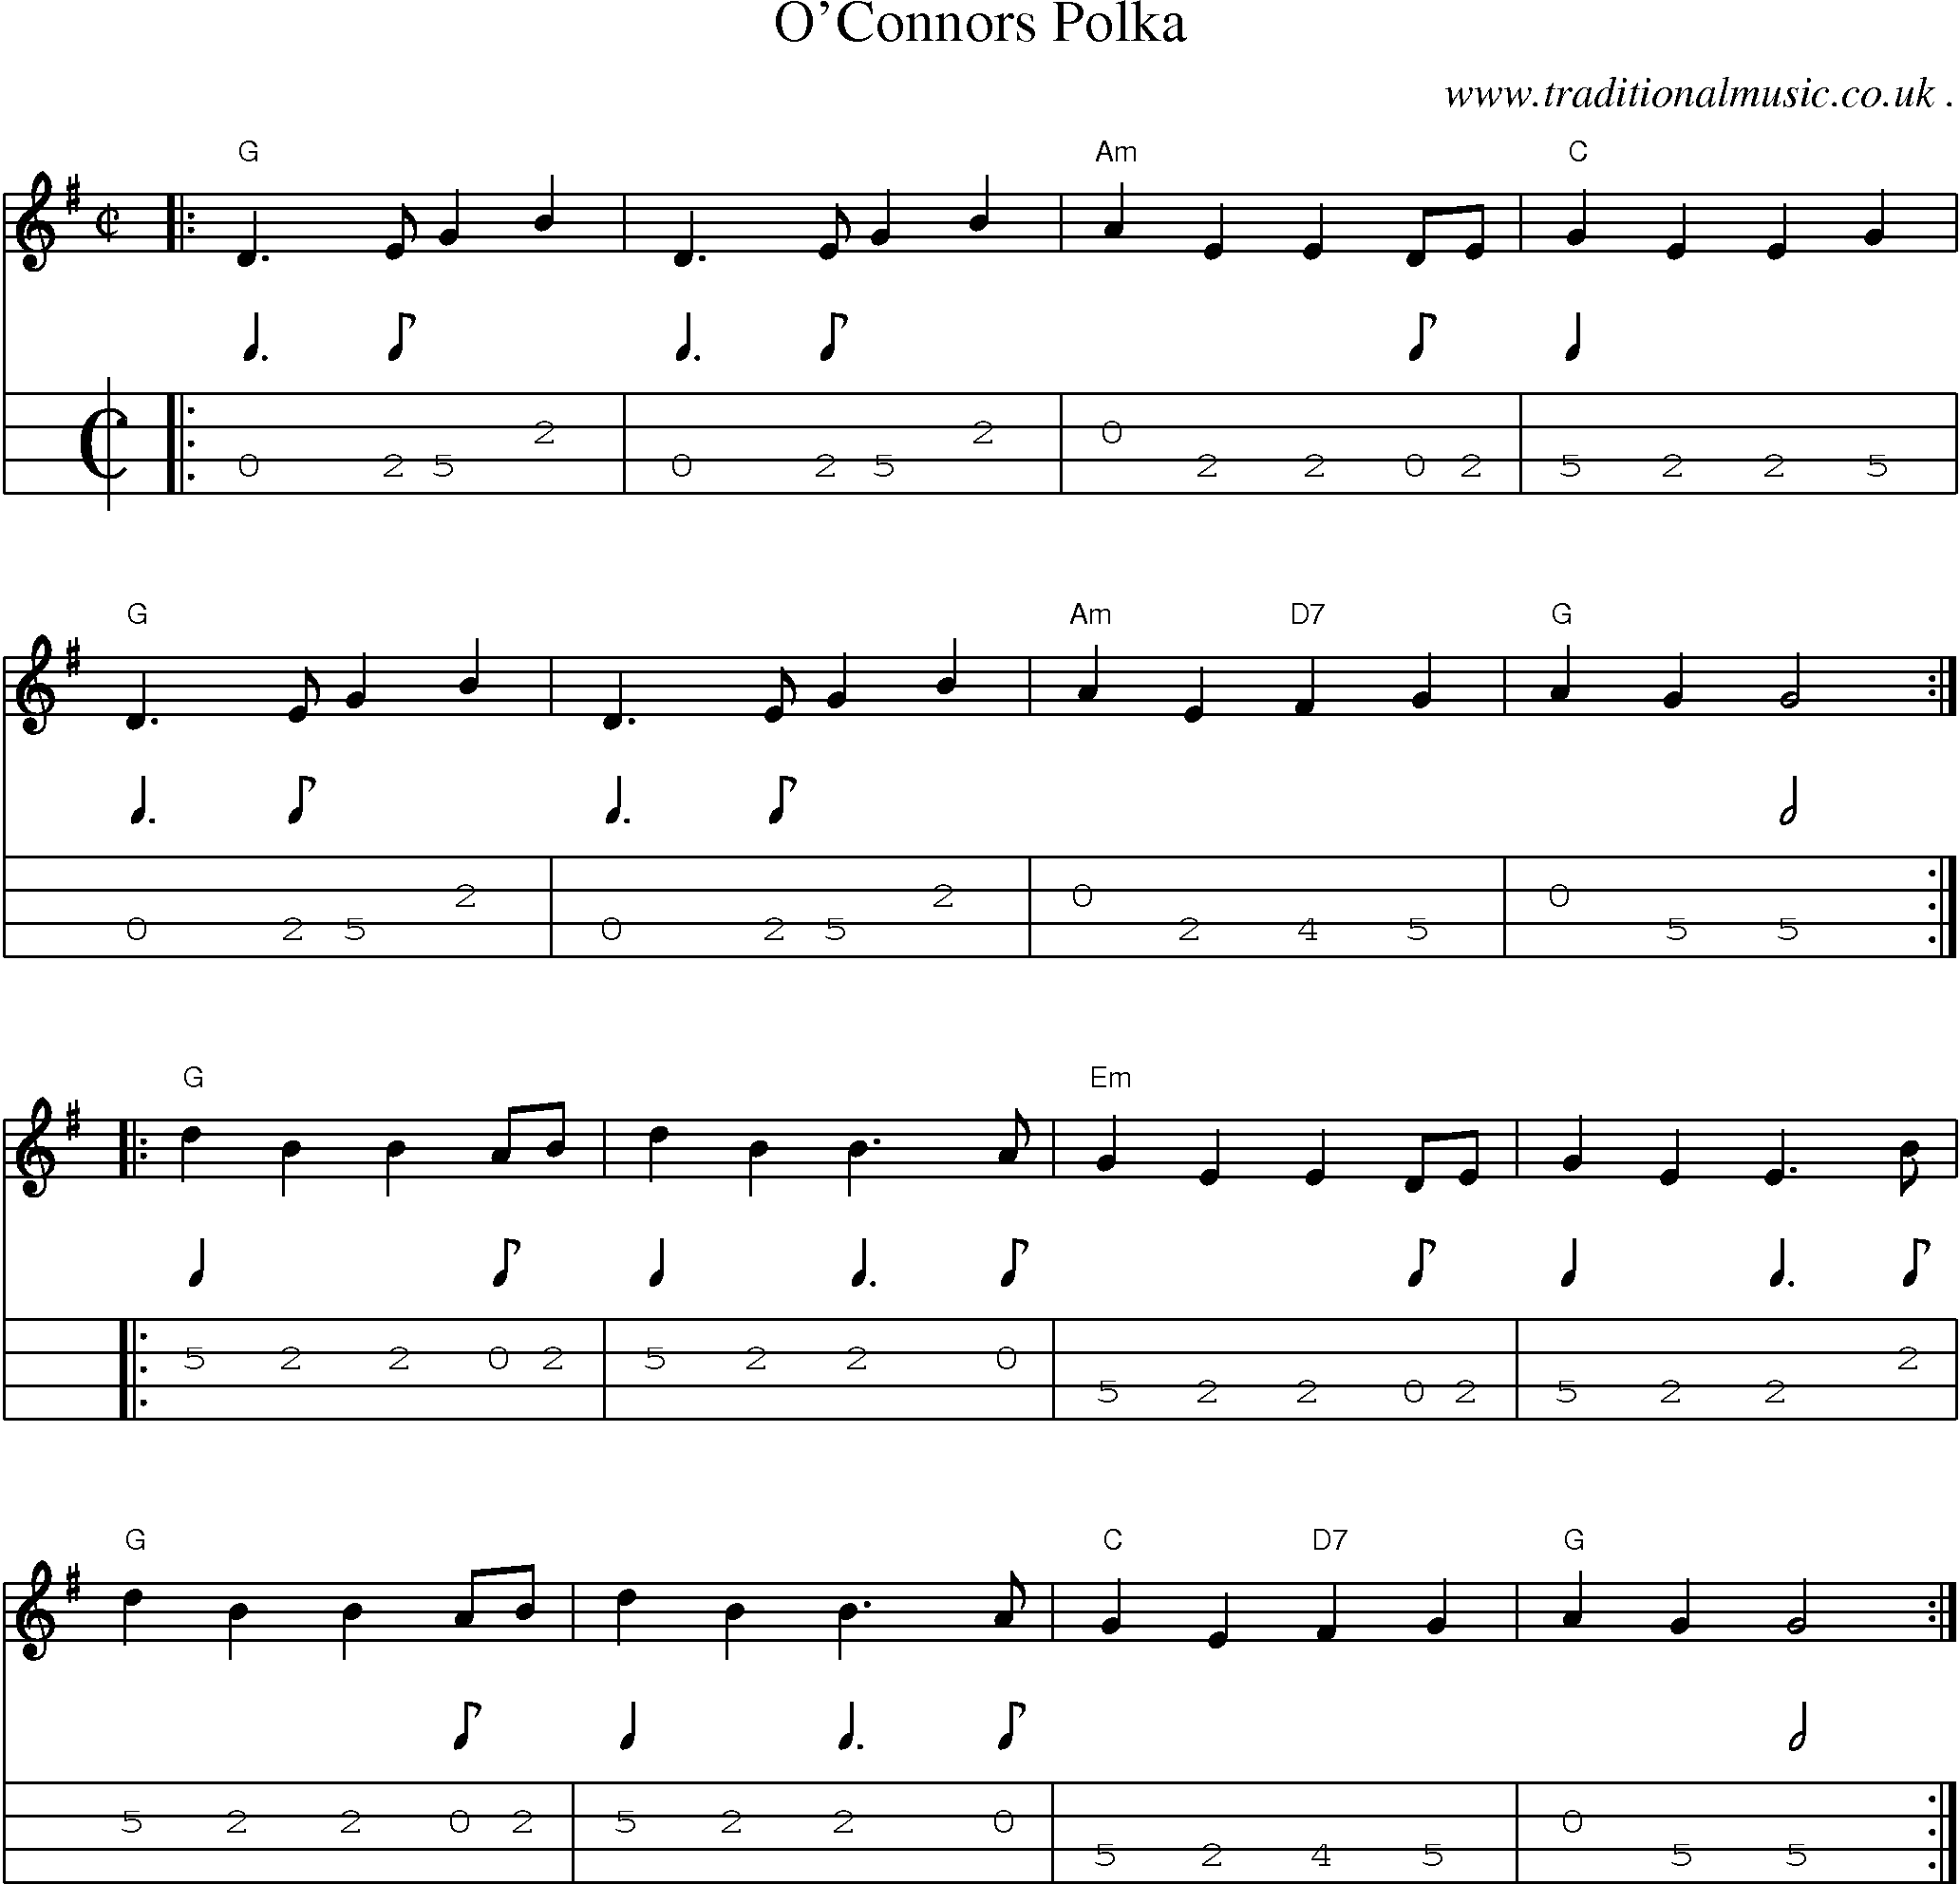 Music Score and Guitar Tabs for Oconnors Polka